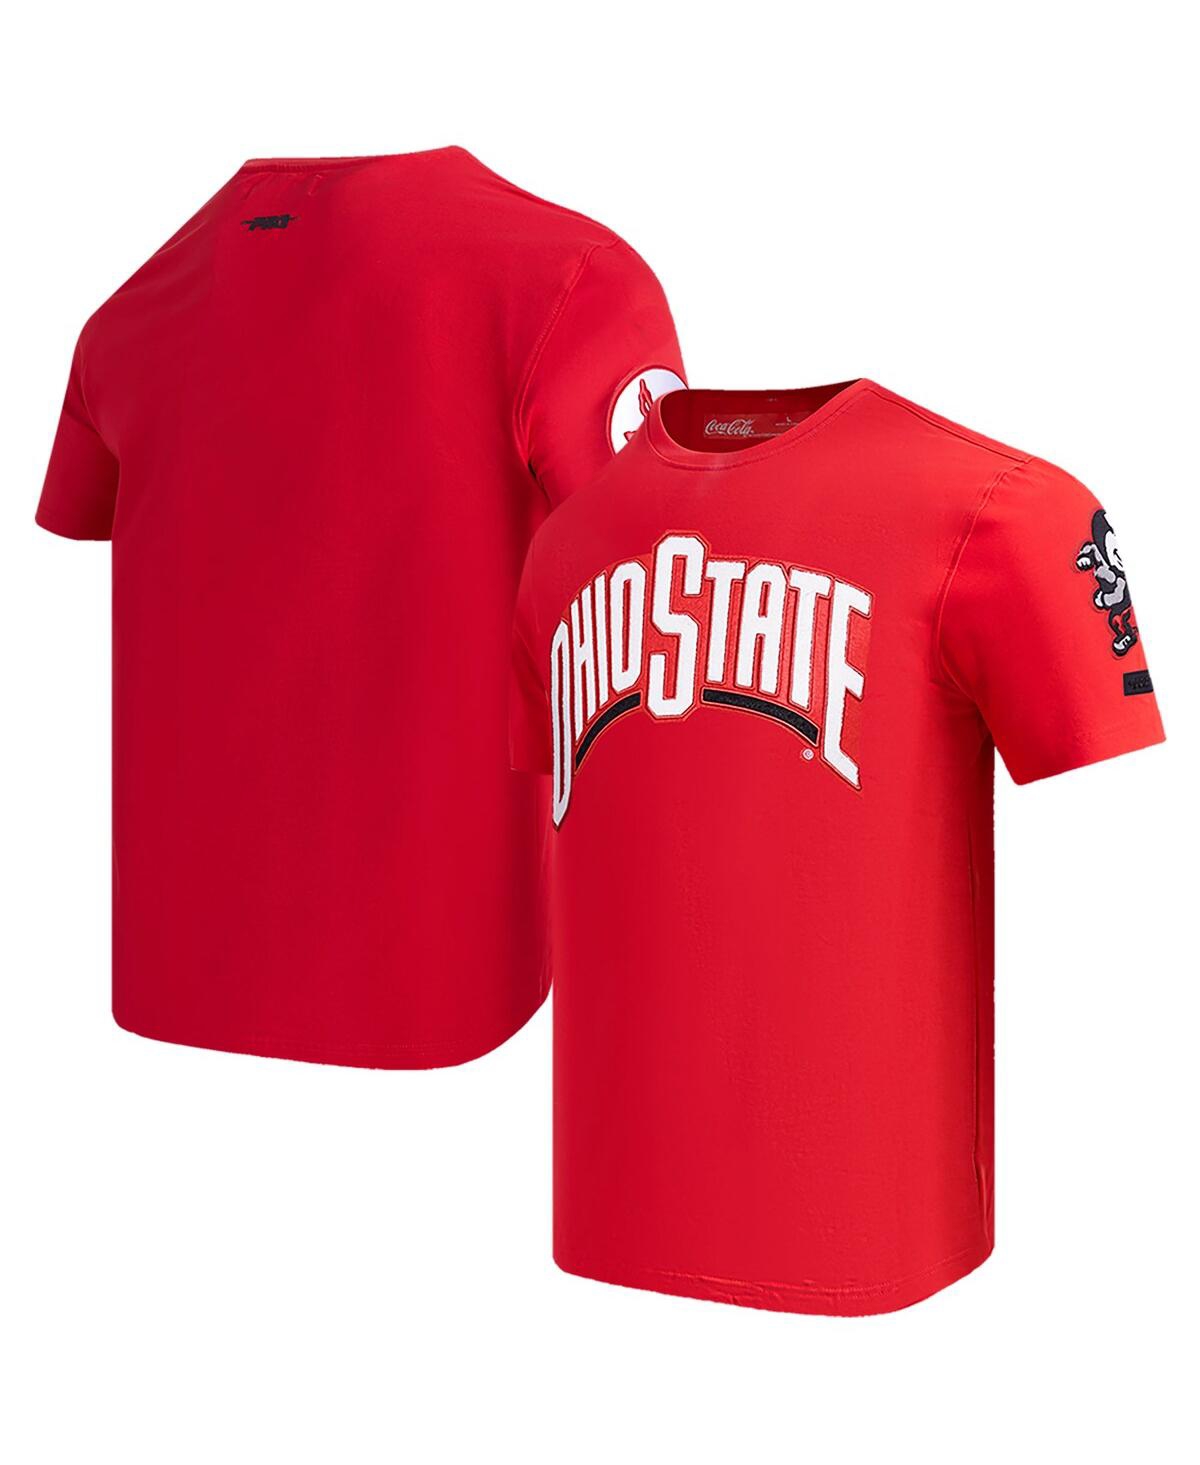 Shop Pro Standard Men's  Scarlet Distressed Ohio State Buckeyes Classic T-shirt